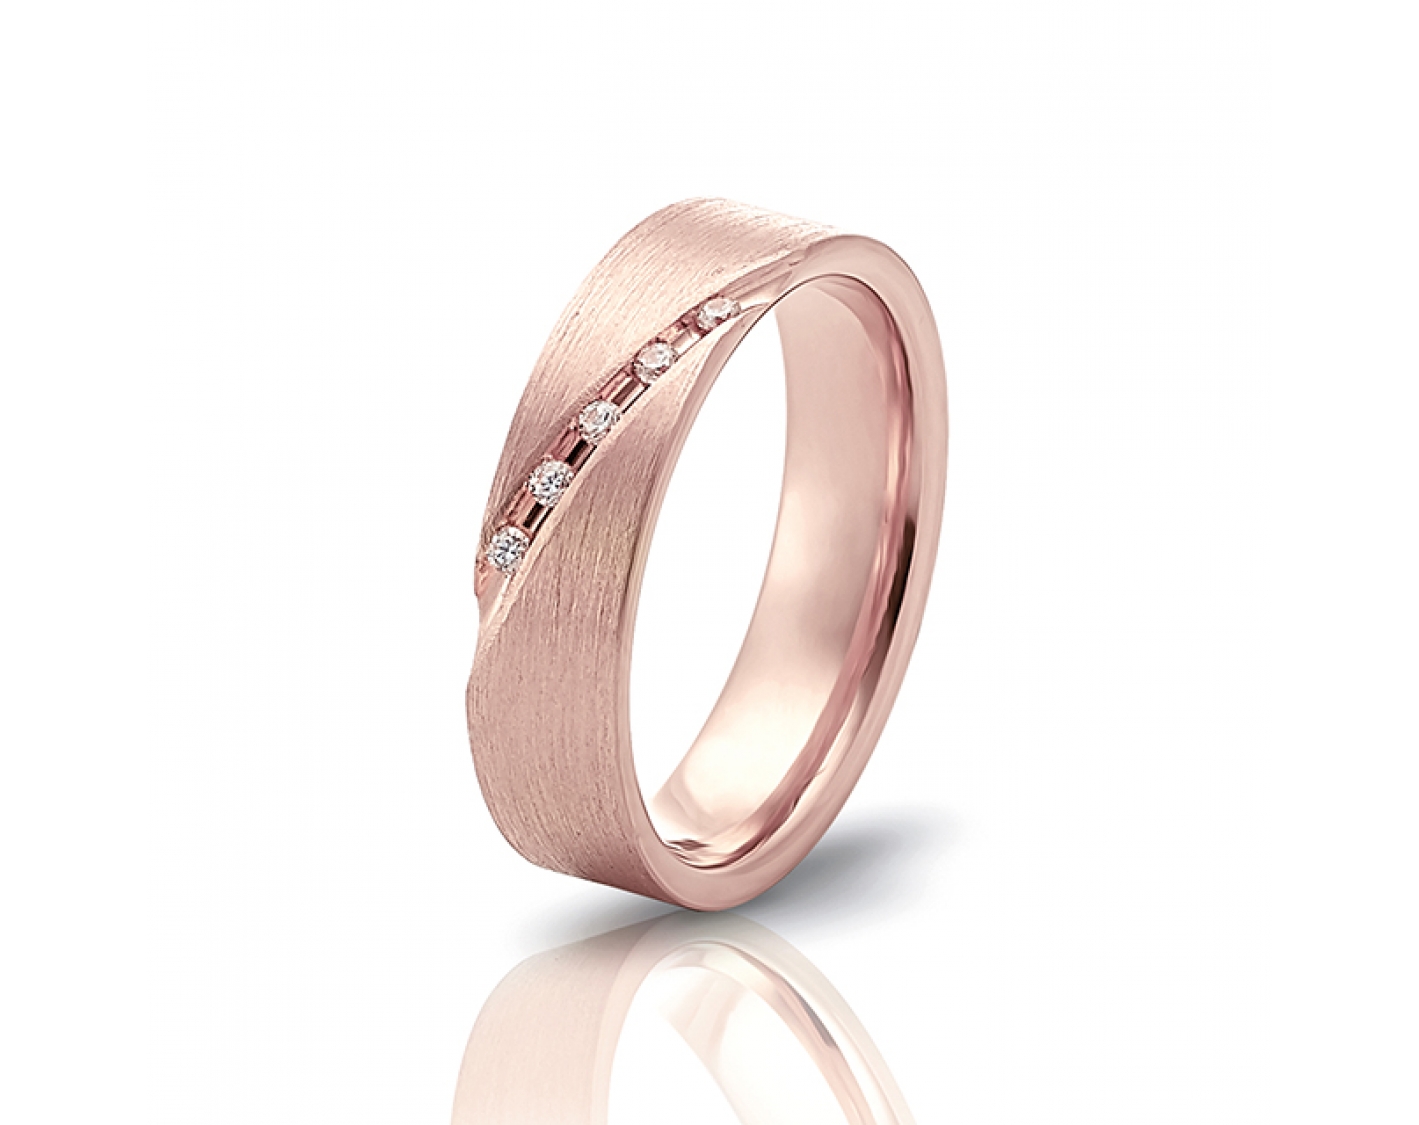 18k rose gold 5mm matte wedding band with diagonal line and diamonds